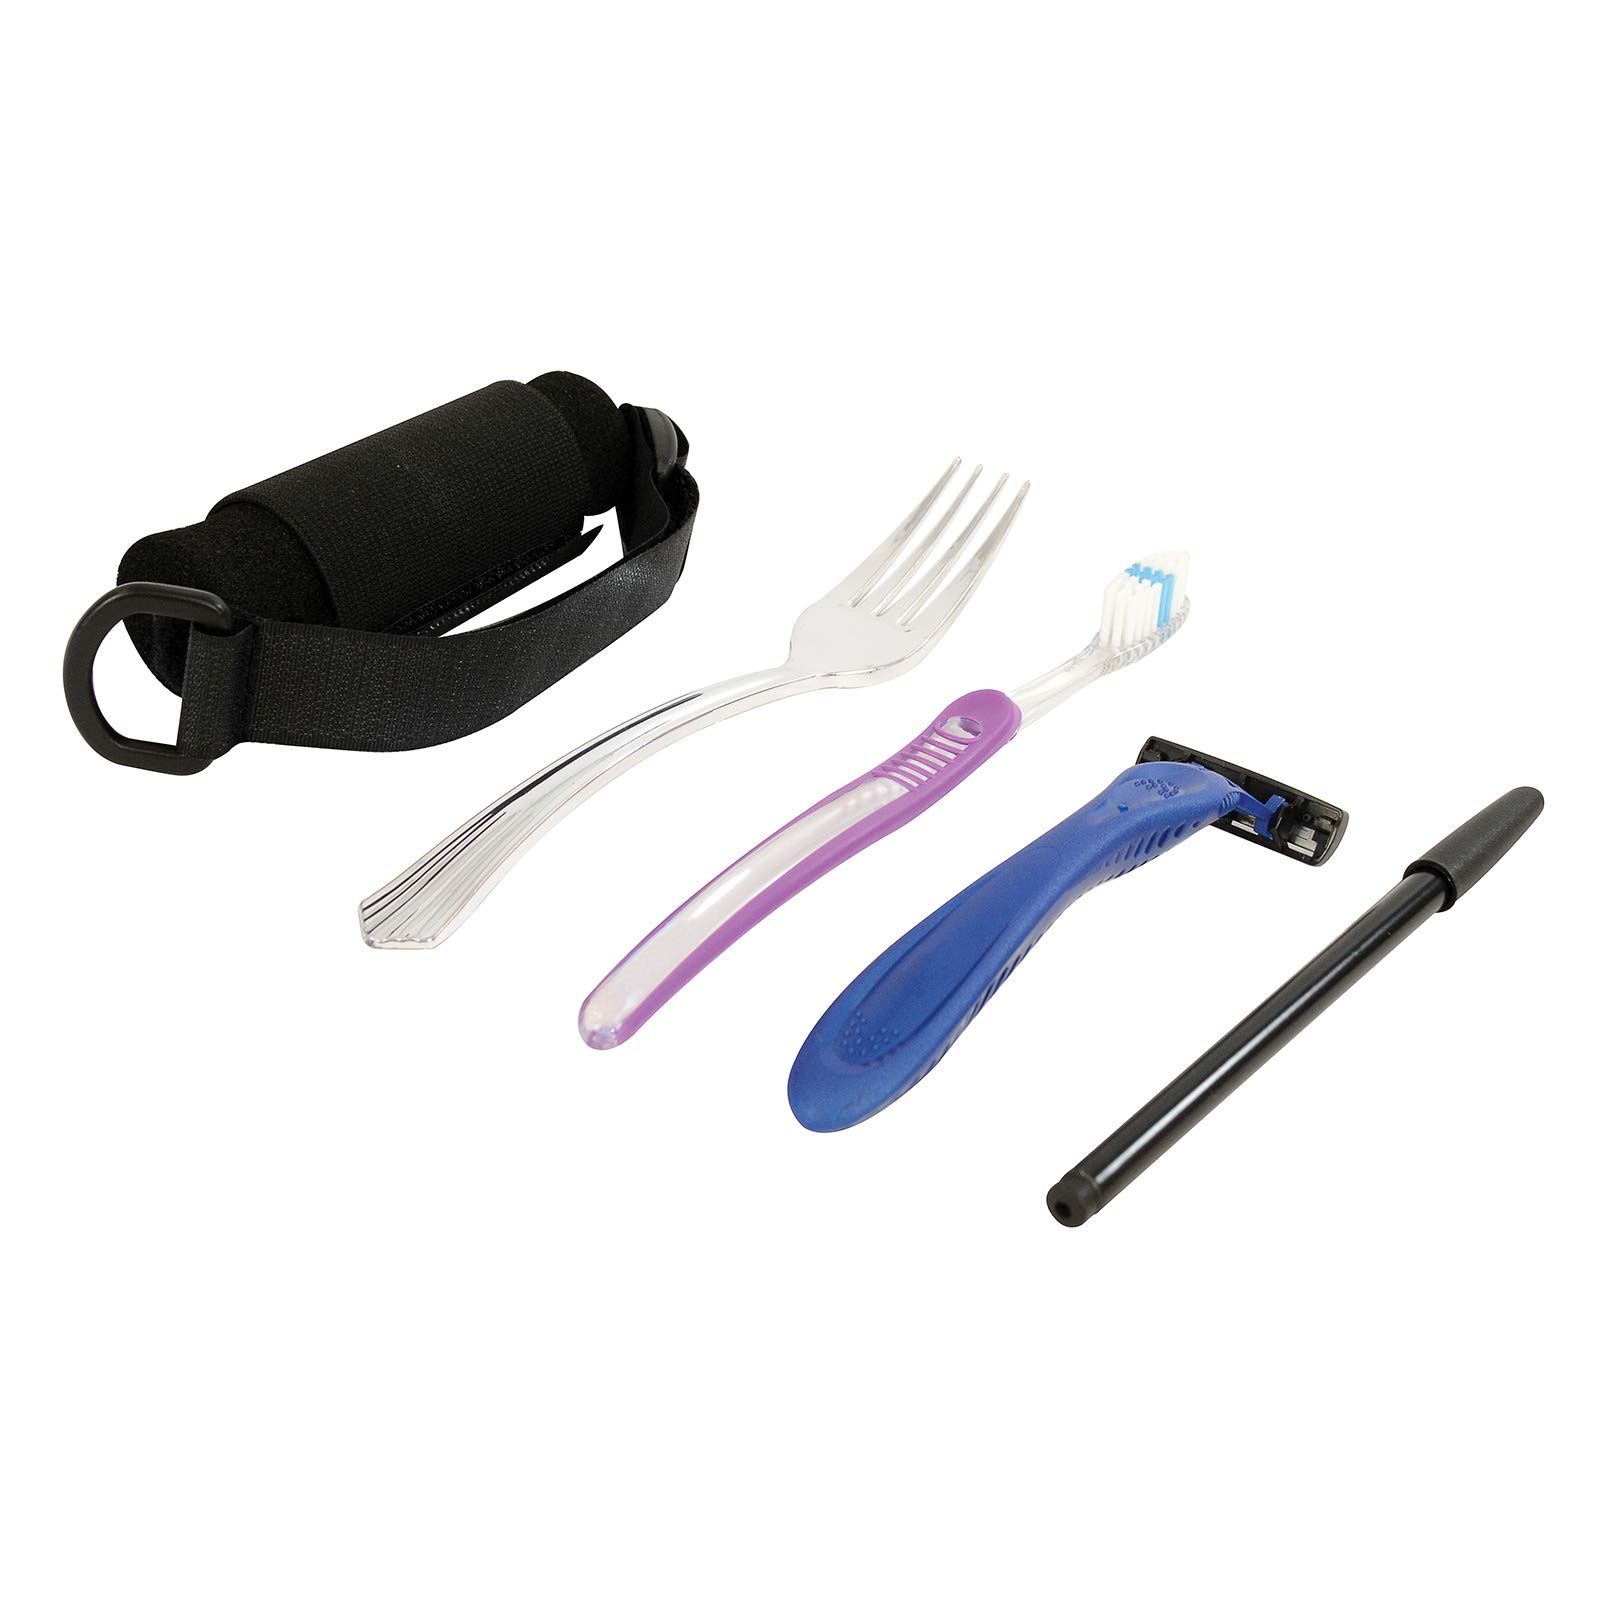 Sammons Preston Universal Holder Strap for Elderly, Hand Cuff with Pocket for Holding Cutlery, Pens, Toothbrushes, & Daily Living Tools, Adjustable Velcro Implement Holder for Weak Grip and Arthritis